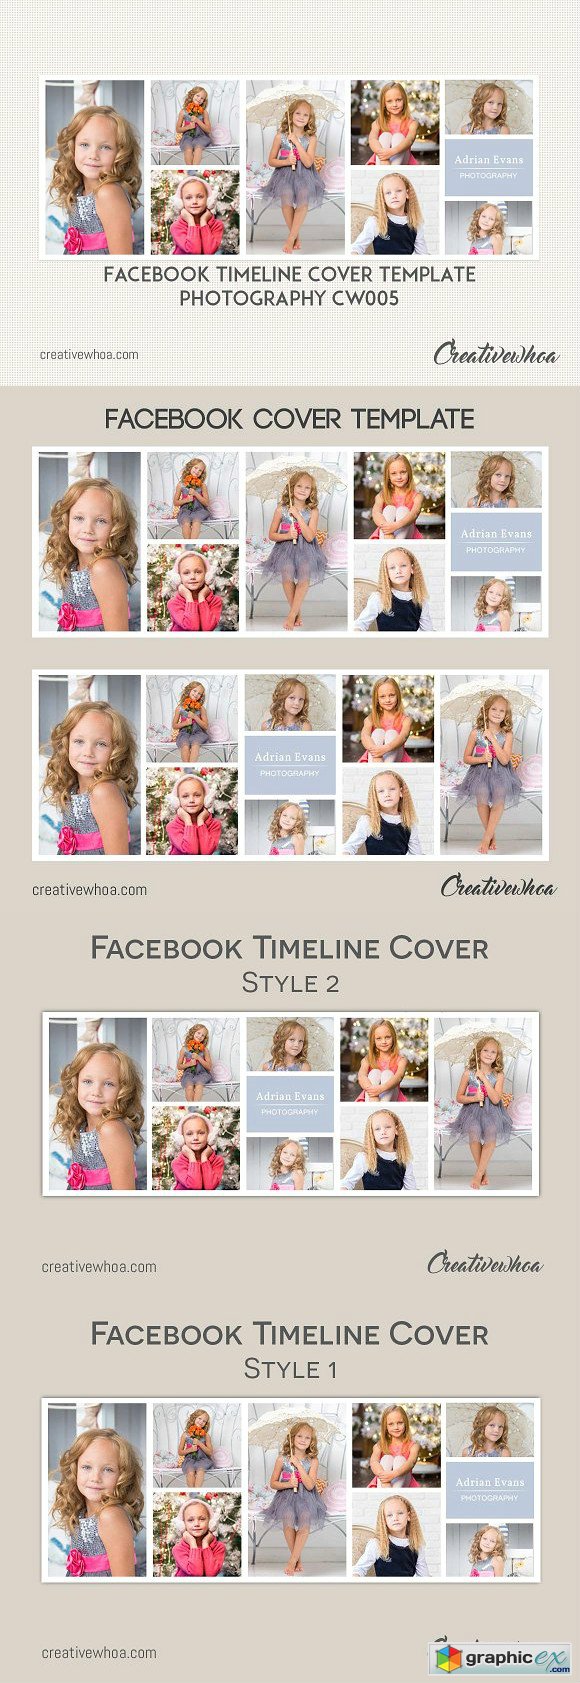 Facebook Photography Timeline Cover